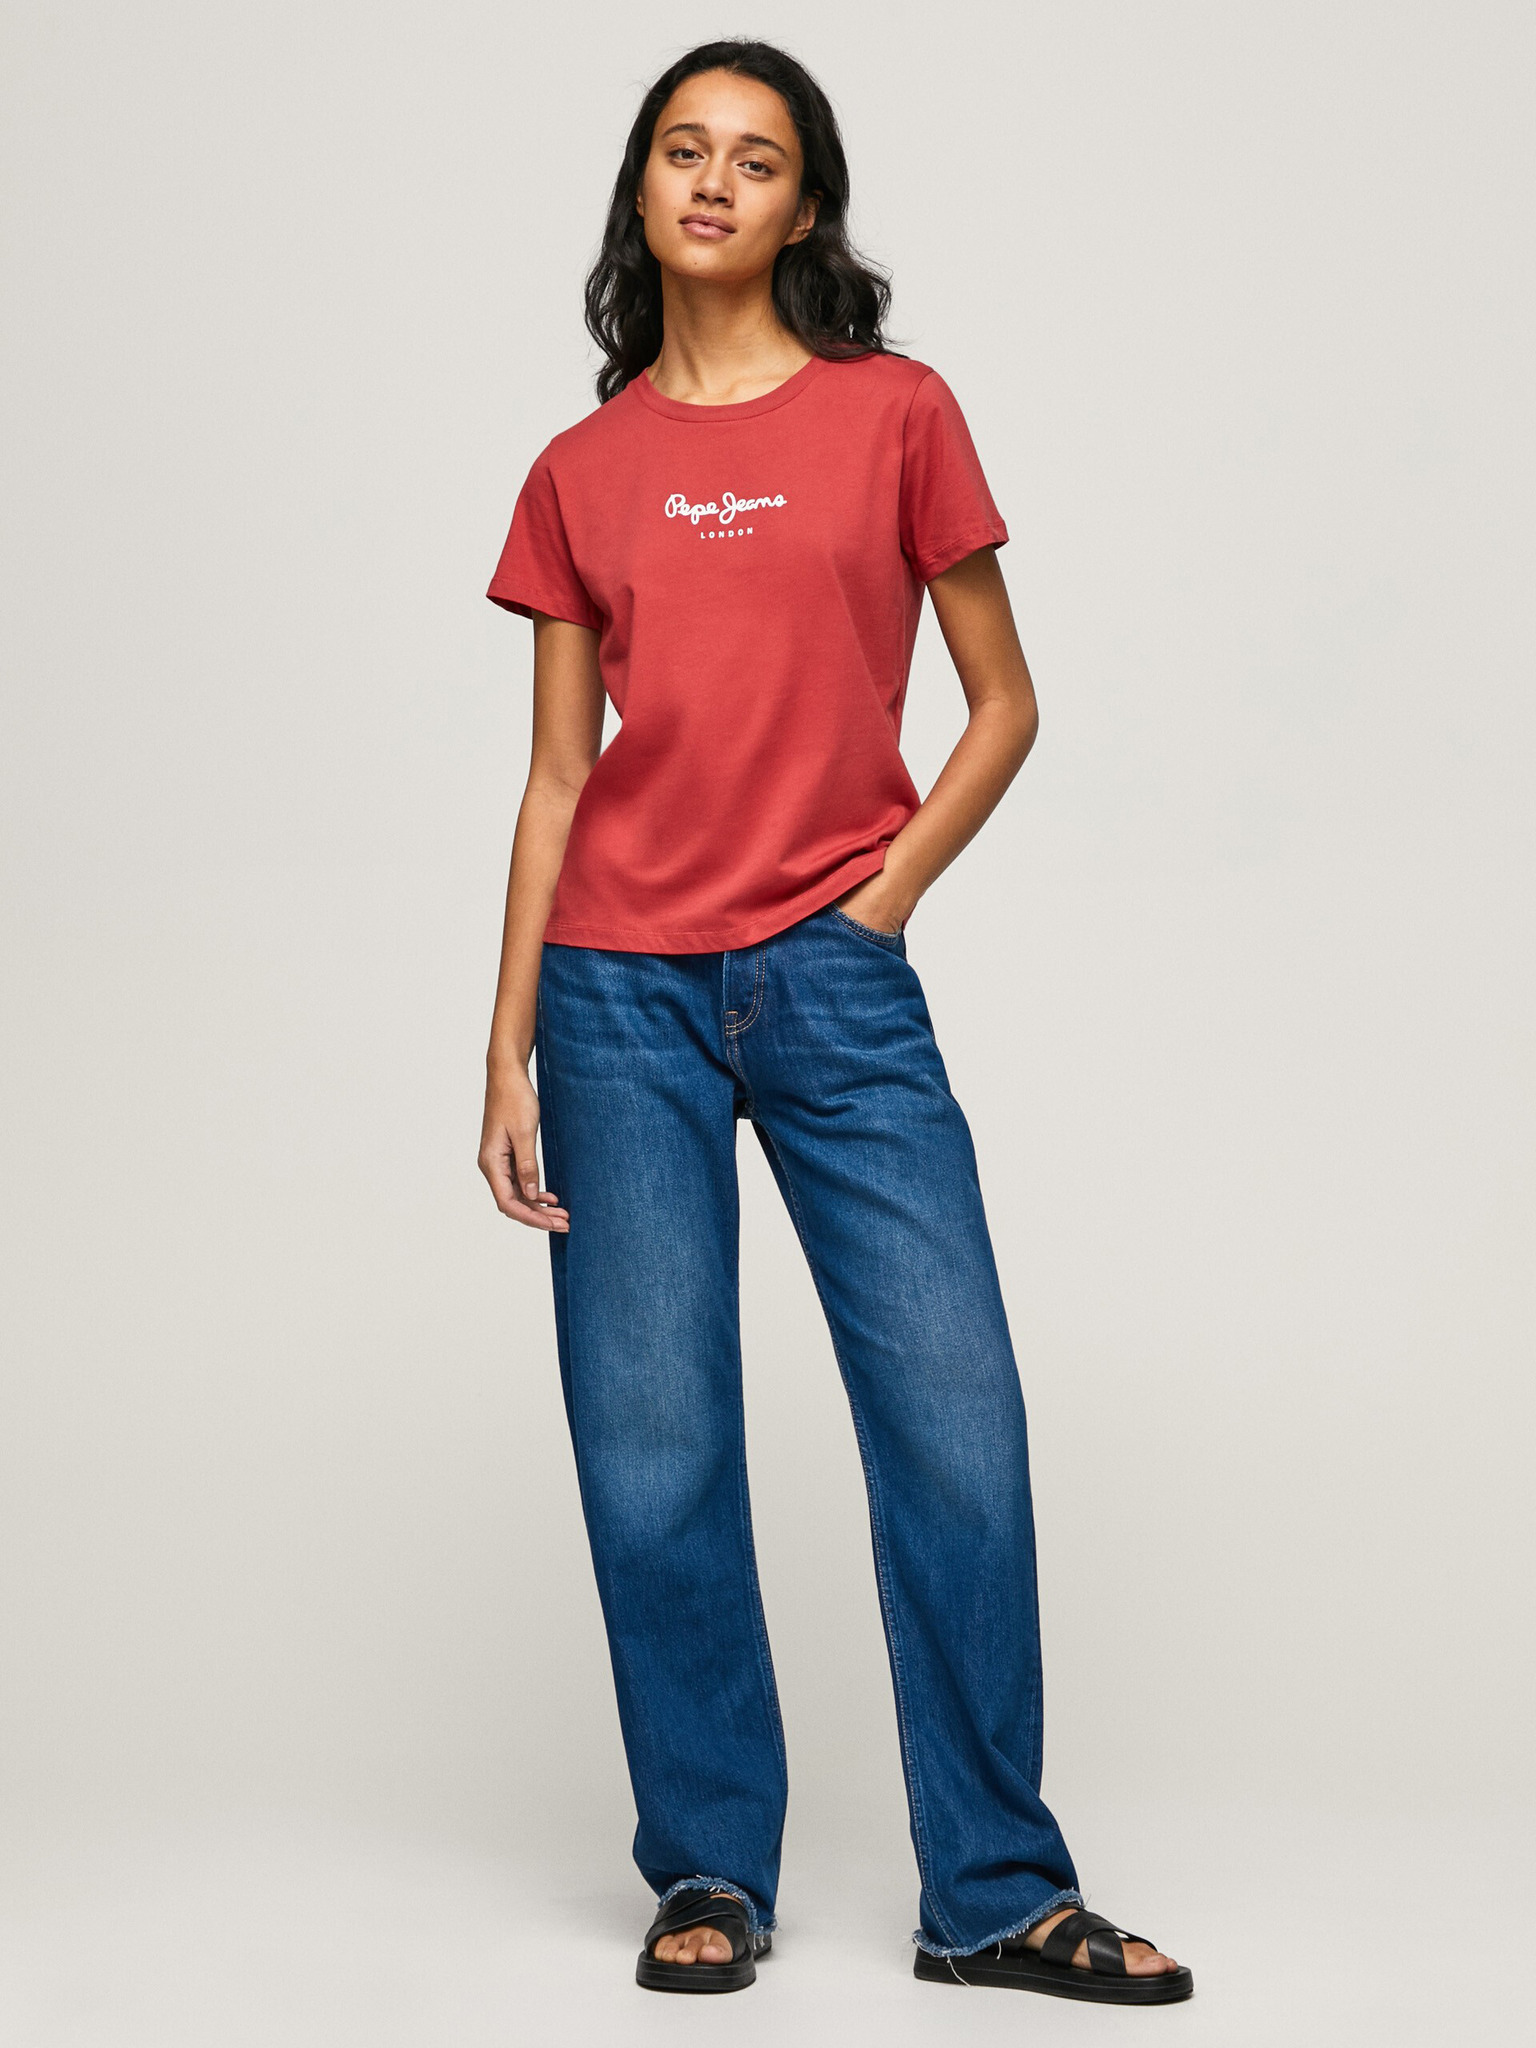 Pepe Jeans - T-Shirt